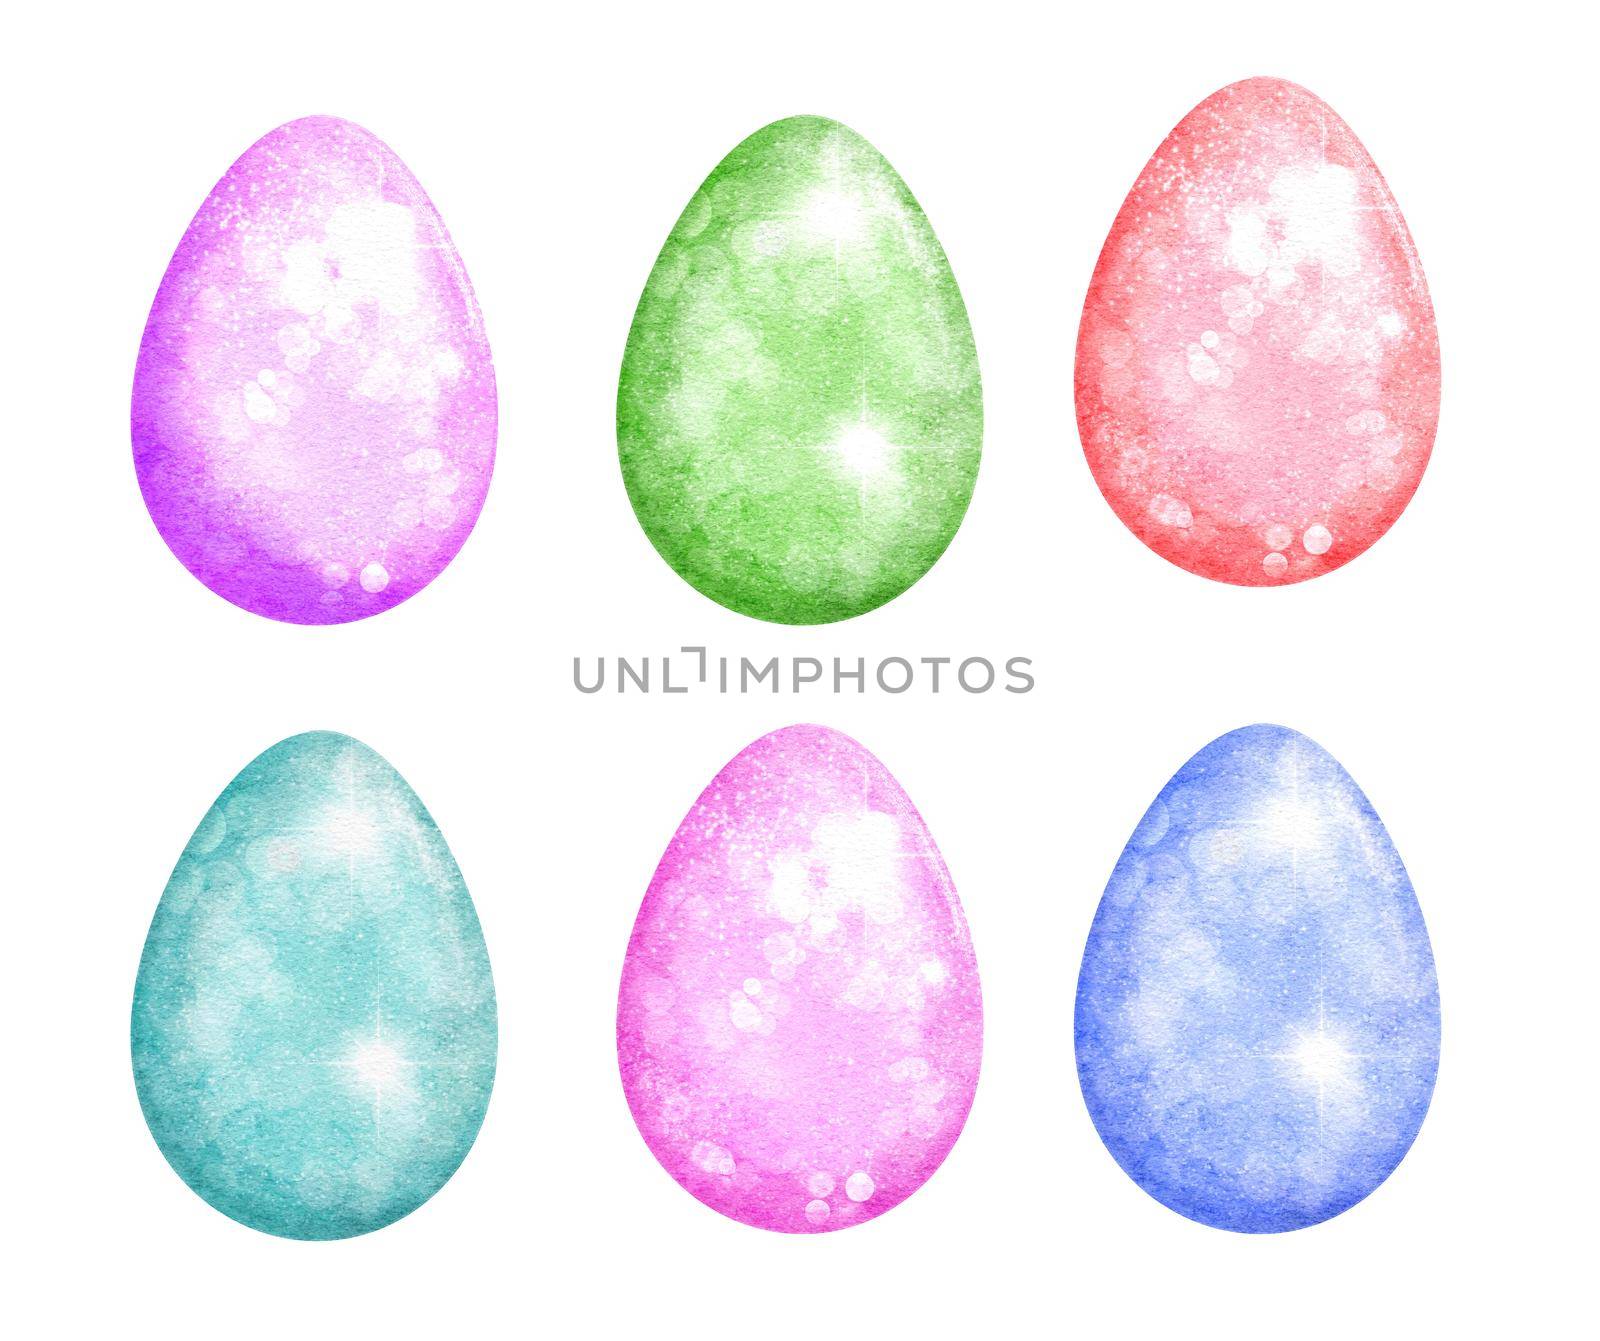 Watercolor hand drawn Easter eggs in purple pink green blue. Spring egg hunt april celebration design with glitter shiny shimmering texture background. by Lagmar